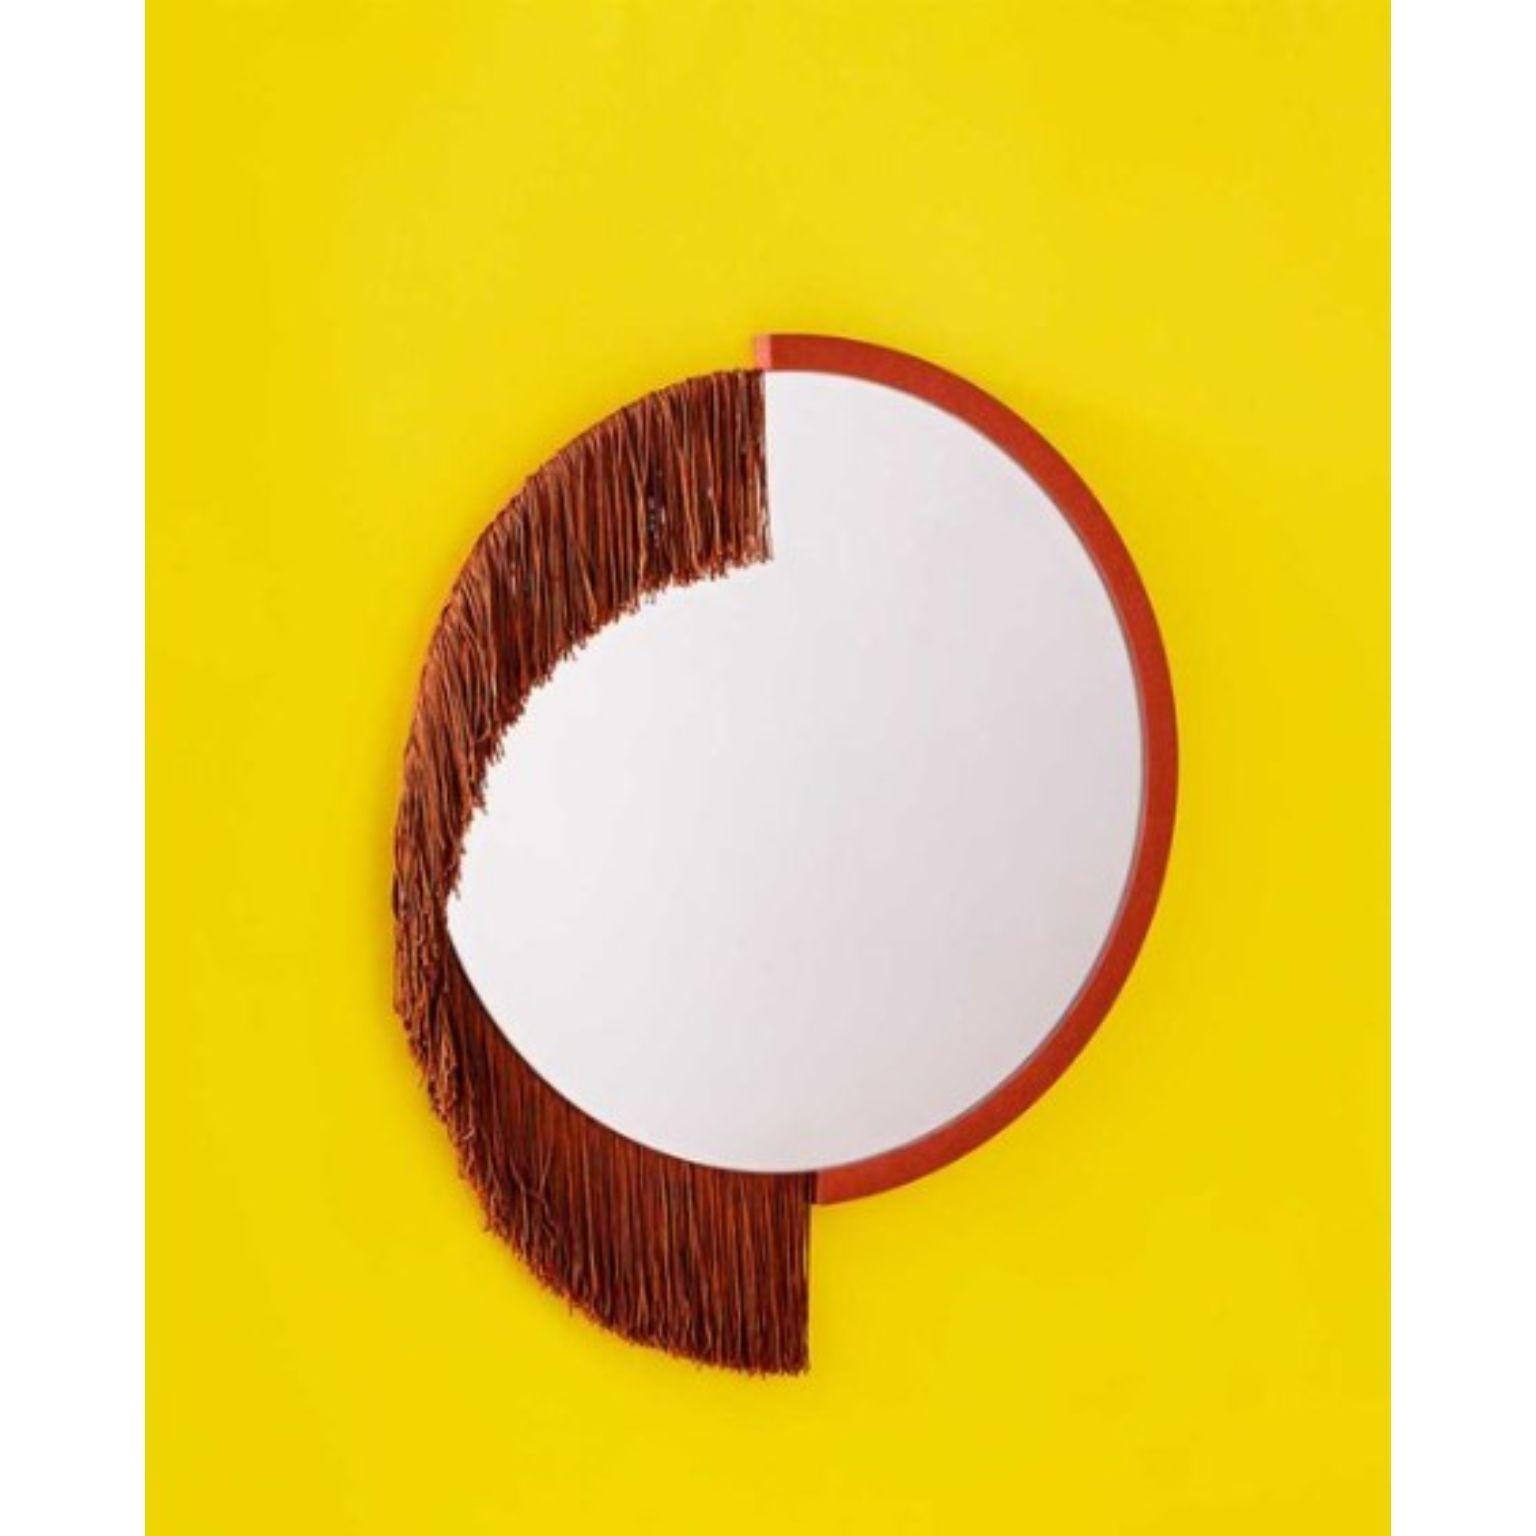 Post-Modern Set of 4 Boudoir Wall Mirrors by Tero Kuitunen For Sale